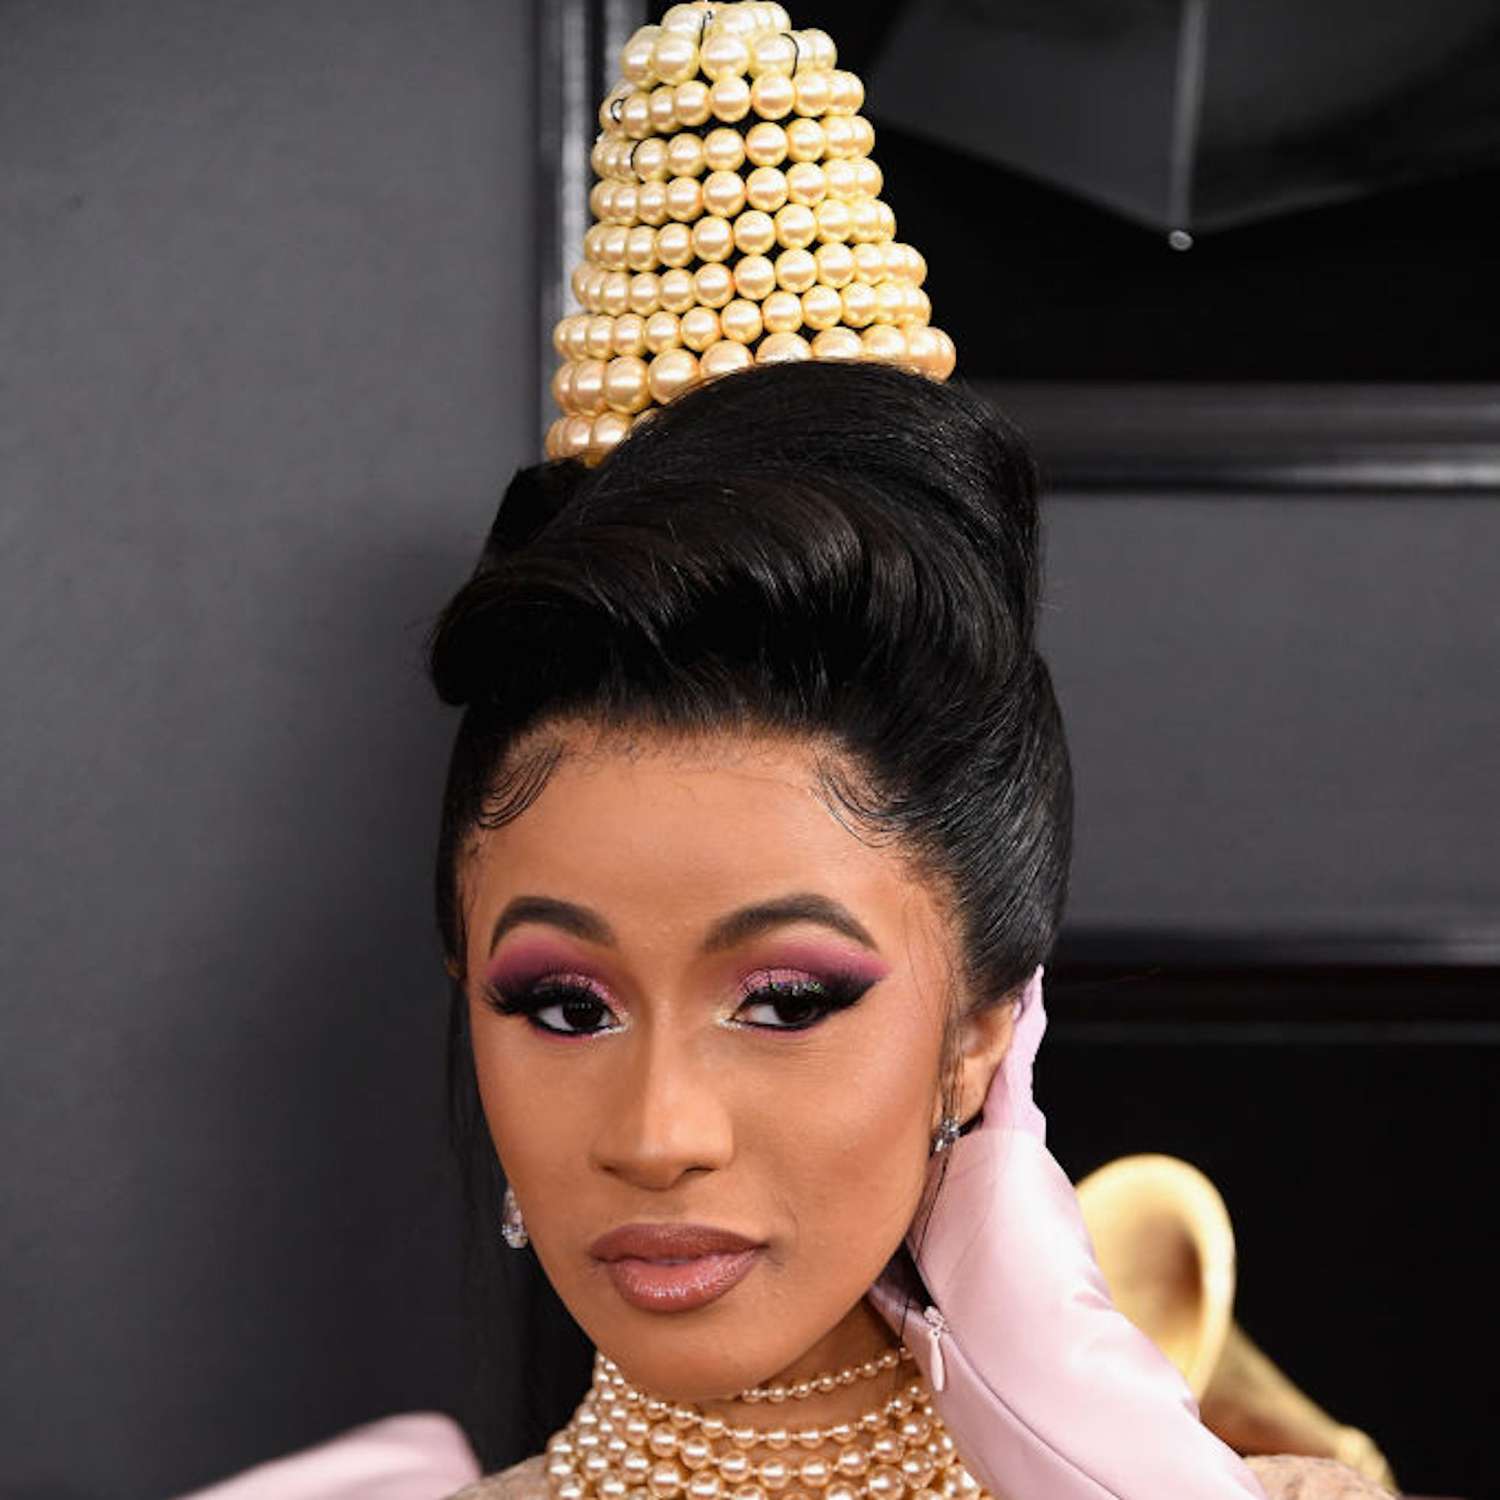 Cardi B with a dramatic updo hairstyle, covered in pears